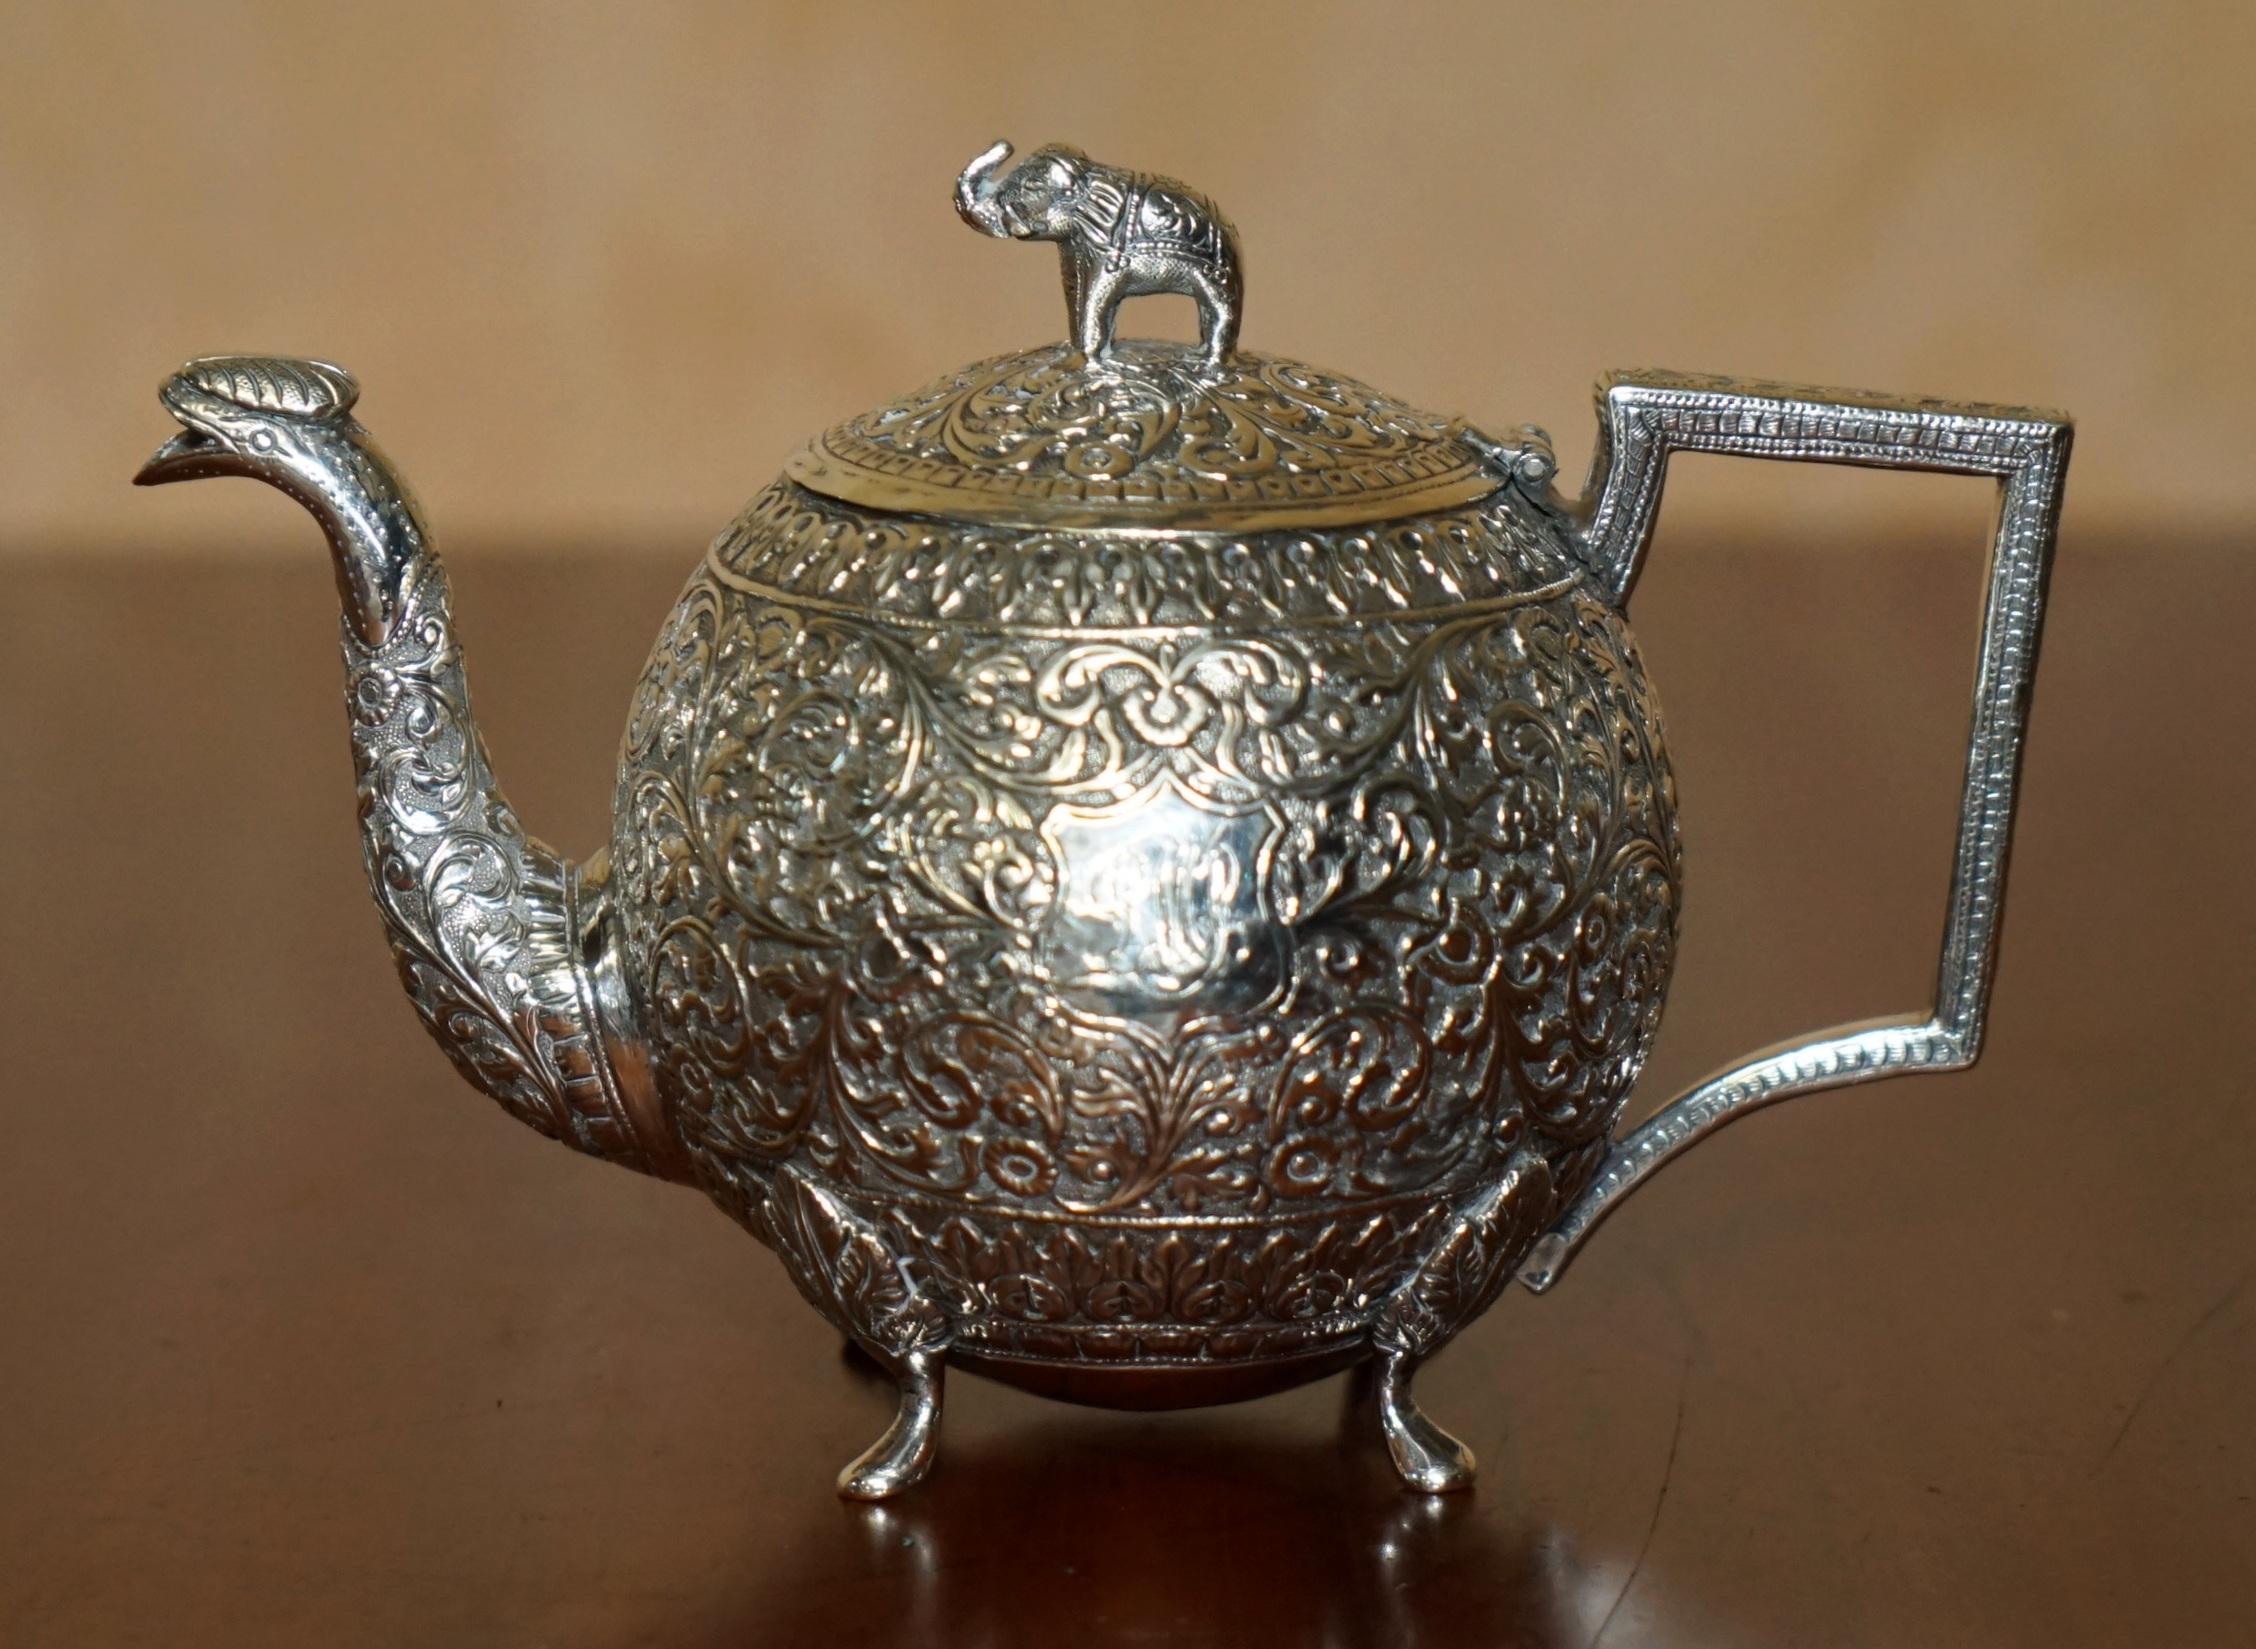 Royal House Antiques

Royal House Antiques is delighted to offer for sale this absolutely stunning original circa 1870 Indian Repoussé Colonial Solid Silver tea service attributed to Oomersi Mawji & Son’s depicting very rare Elephant finials

What a